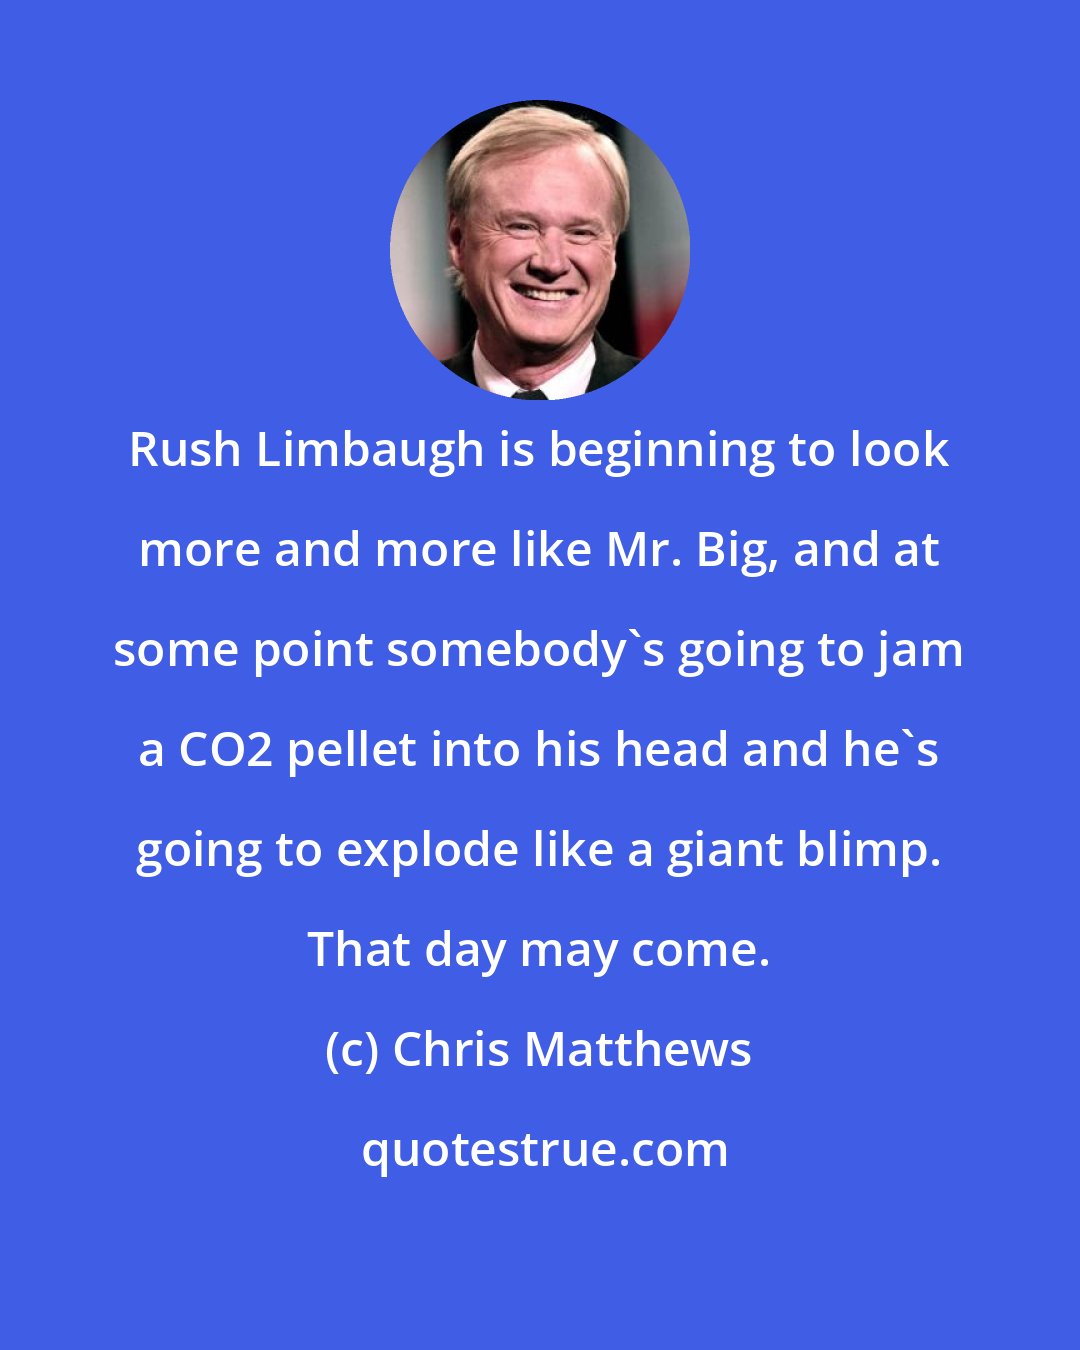 Chris Matthews: Rush Limbaugh is beginning to look more and more like Mr. Big, and at some point somebody's going to jam a CO2 pellet into his head and he's going to explode like a giant blimp. That day may come.